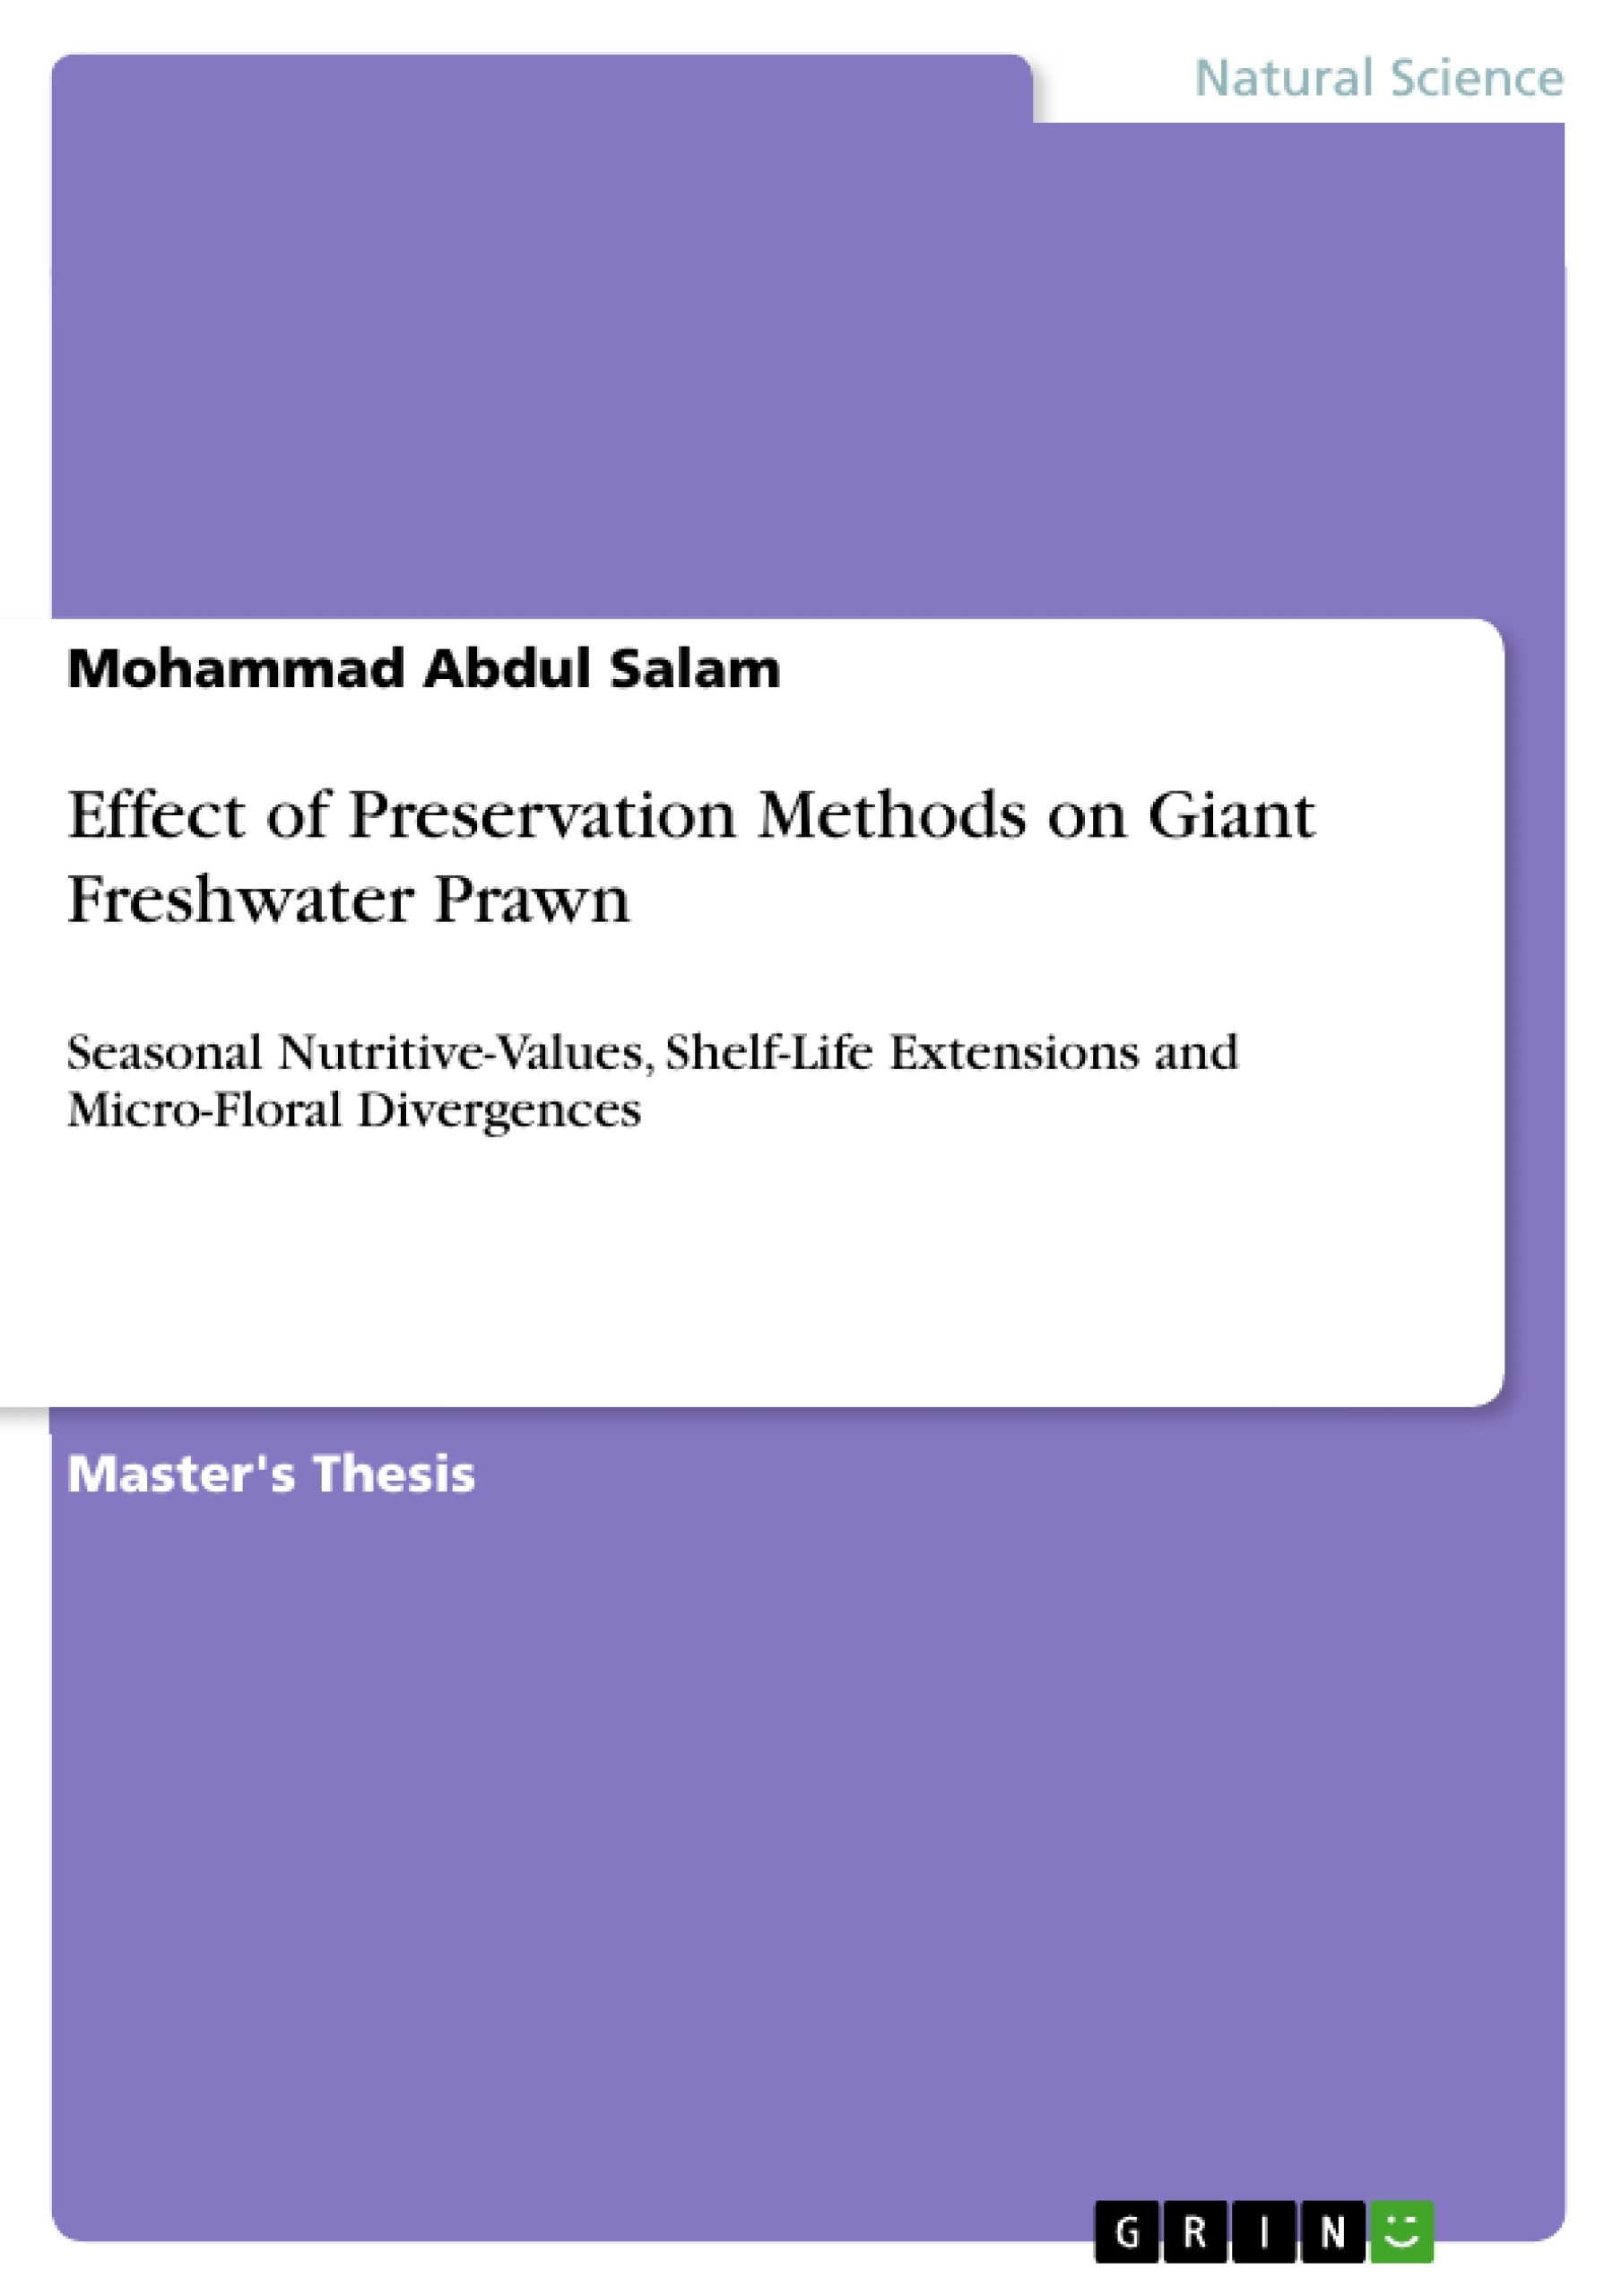 Title: Effect of Preservation Methods on Giant Freshwater Prawn